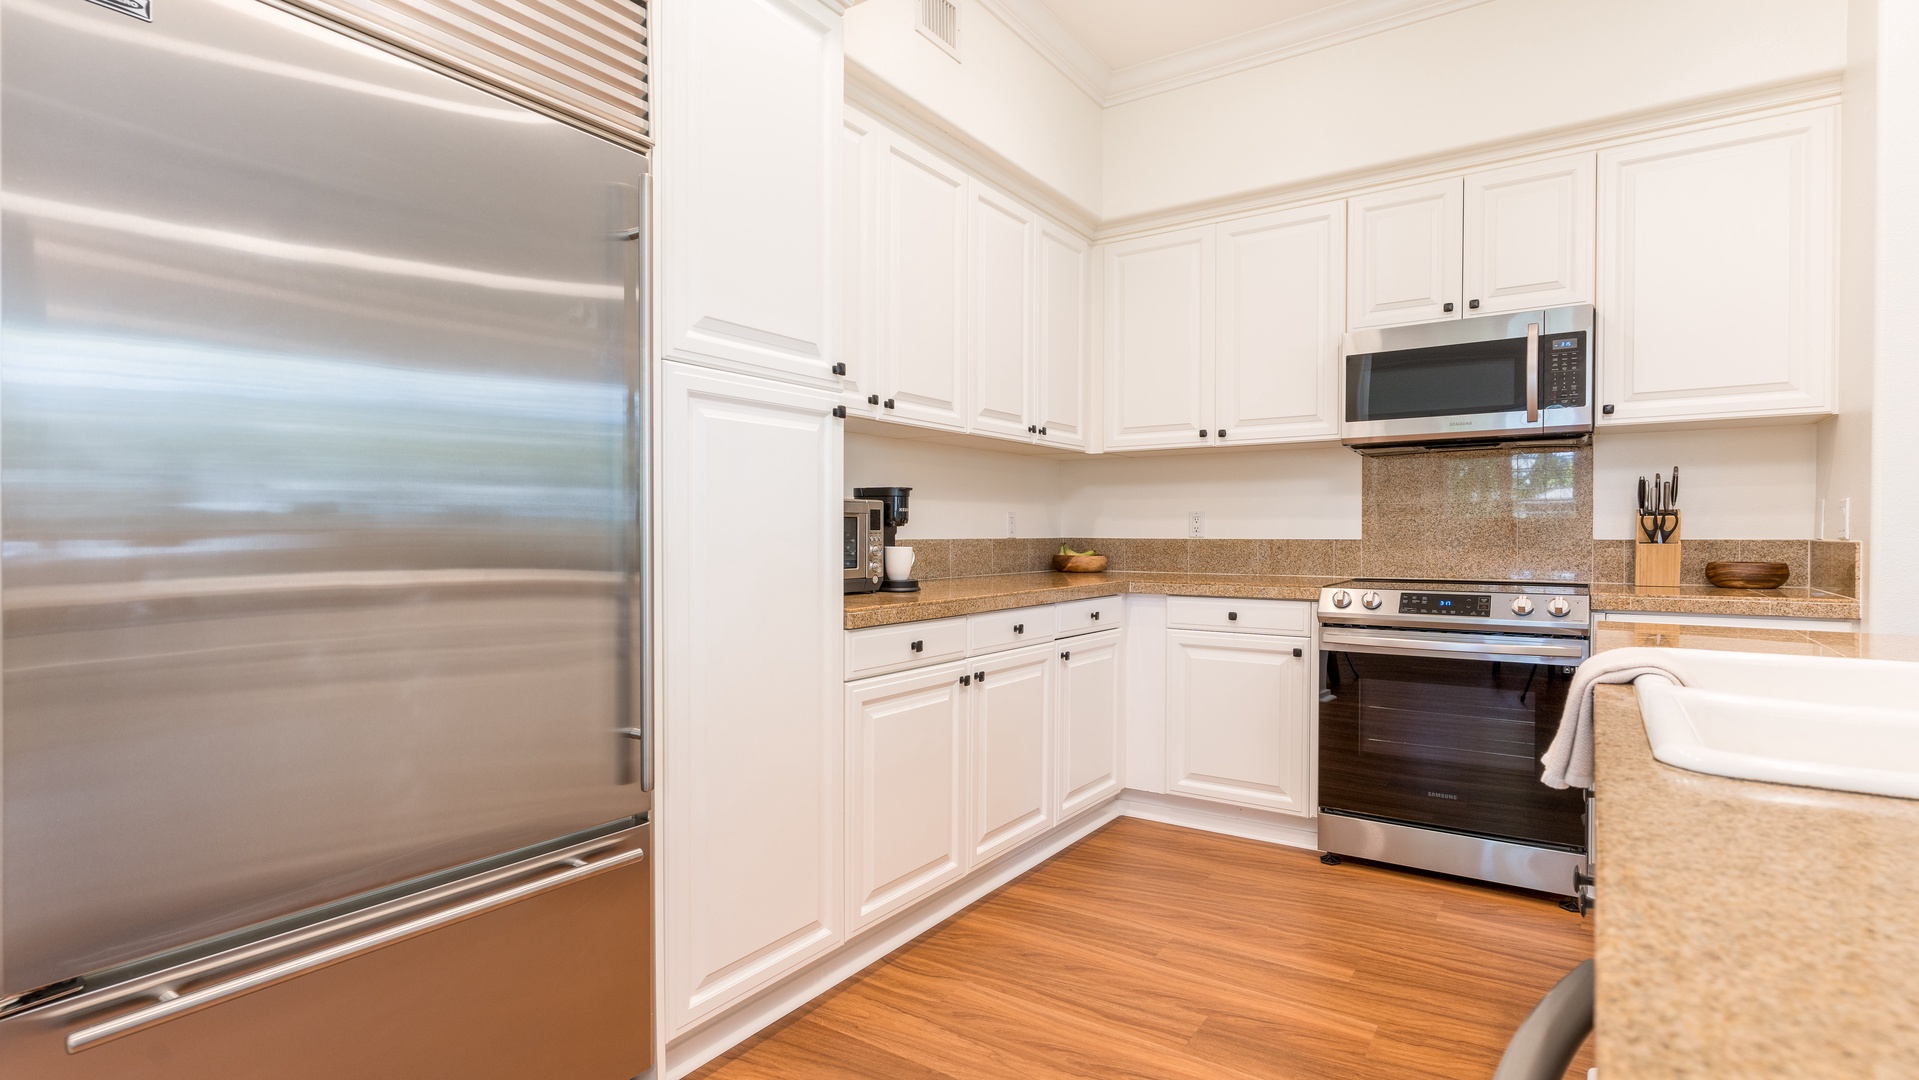 Kapolei Vacation Rentals, Coconut Plantation 1136-4 - The spacious kitchen has all your needs for a relaxing vacation.